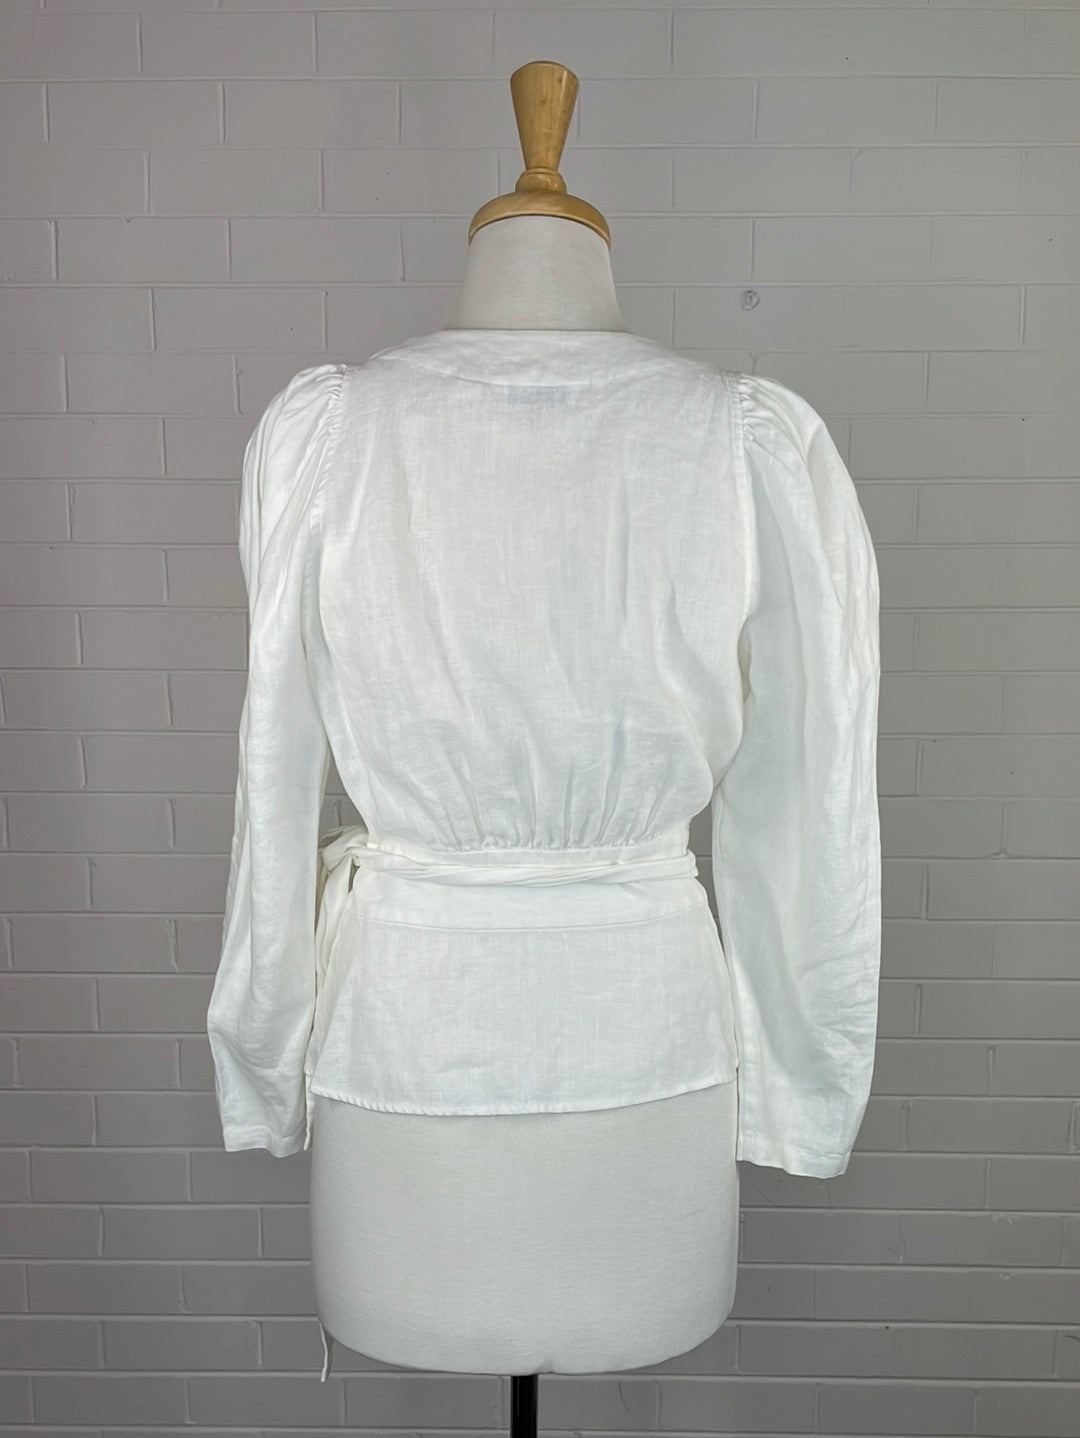 Country Road | top | size 10 | long sleeve | 100% linen